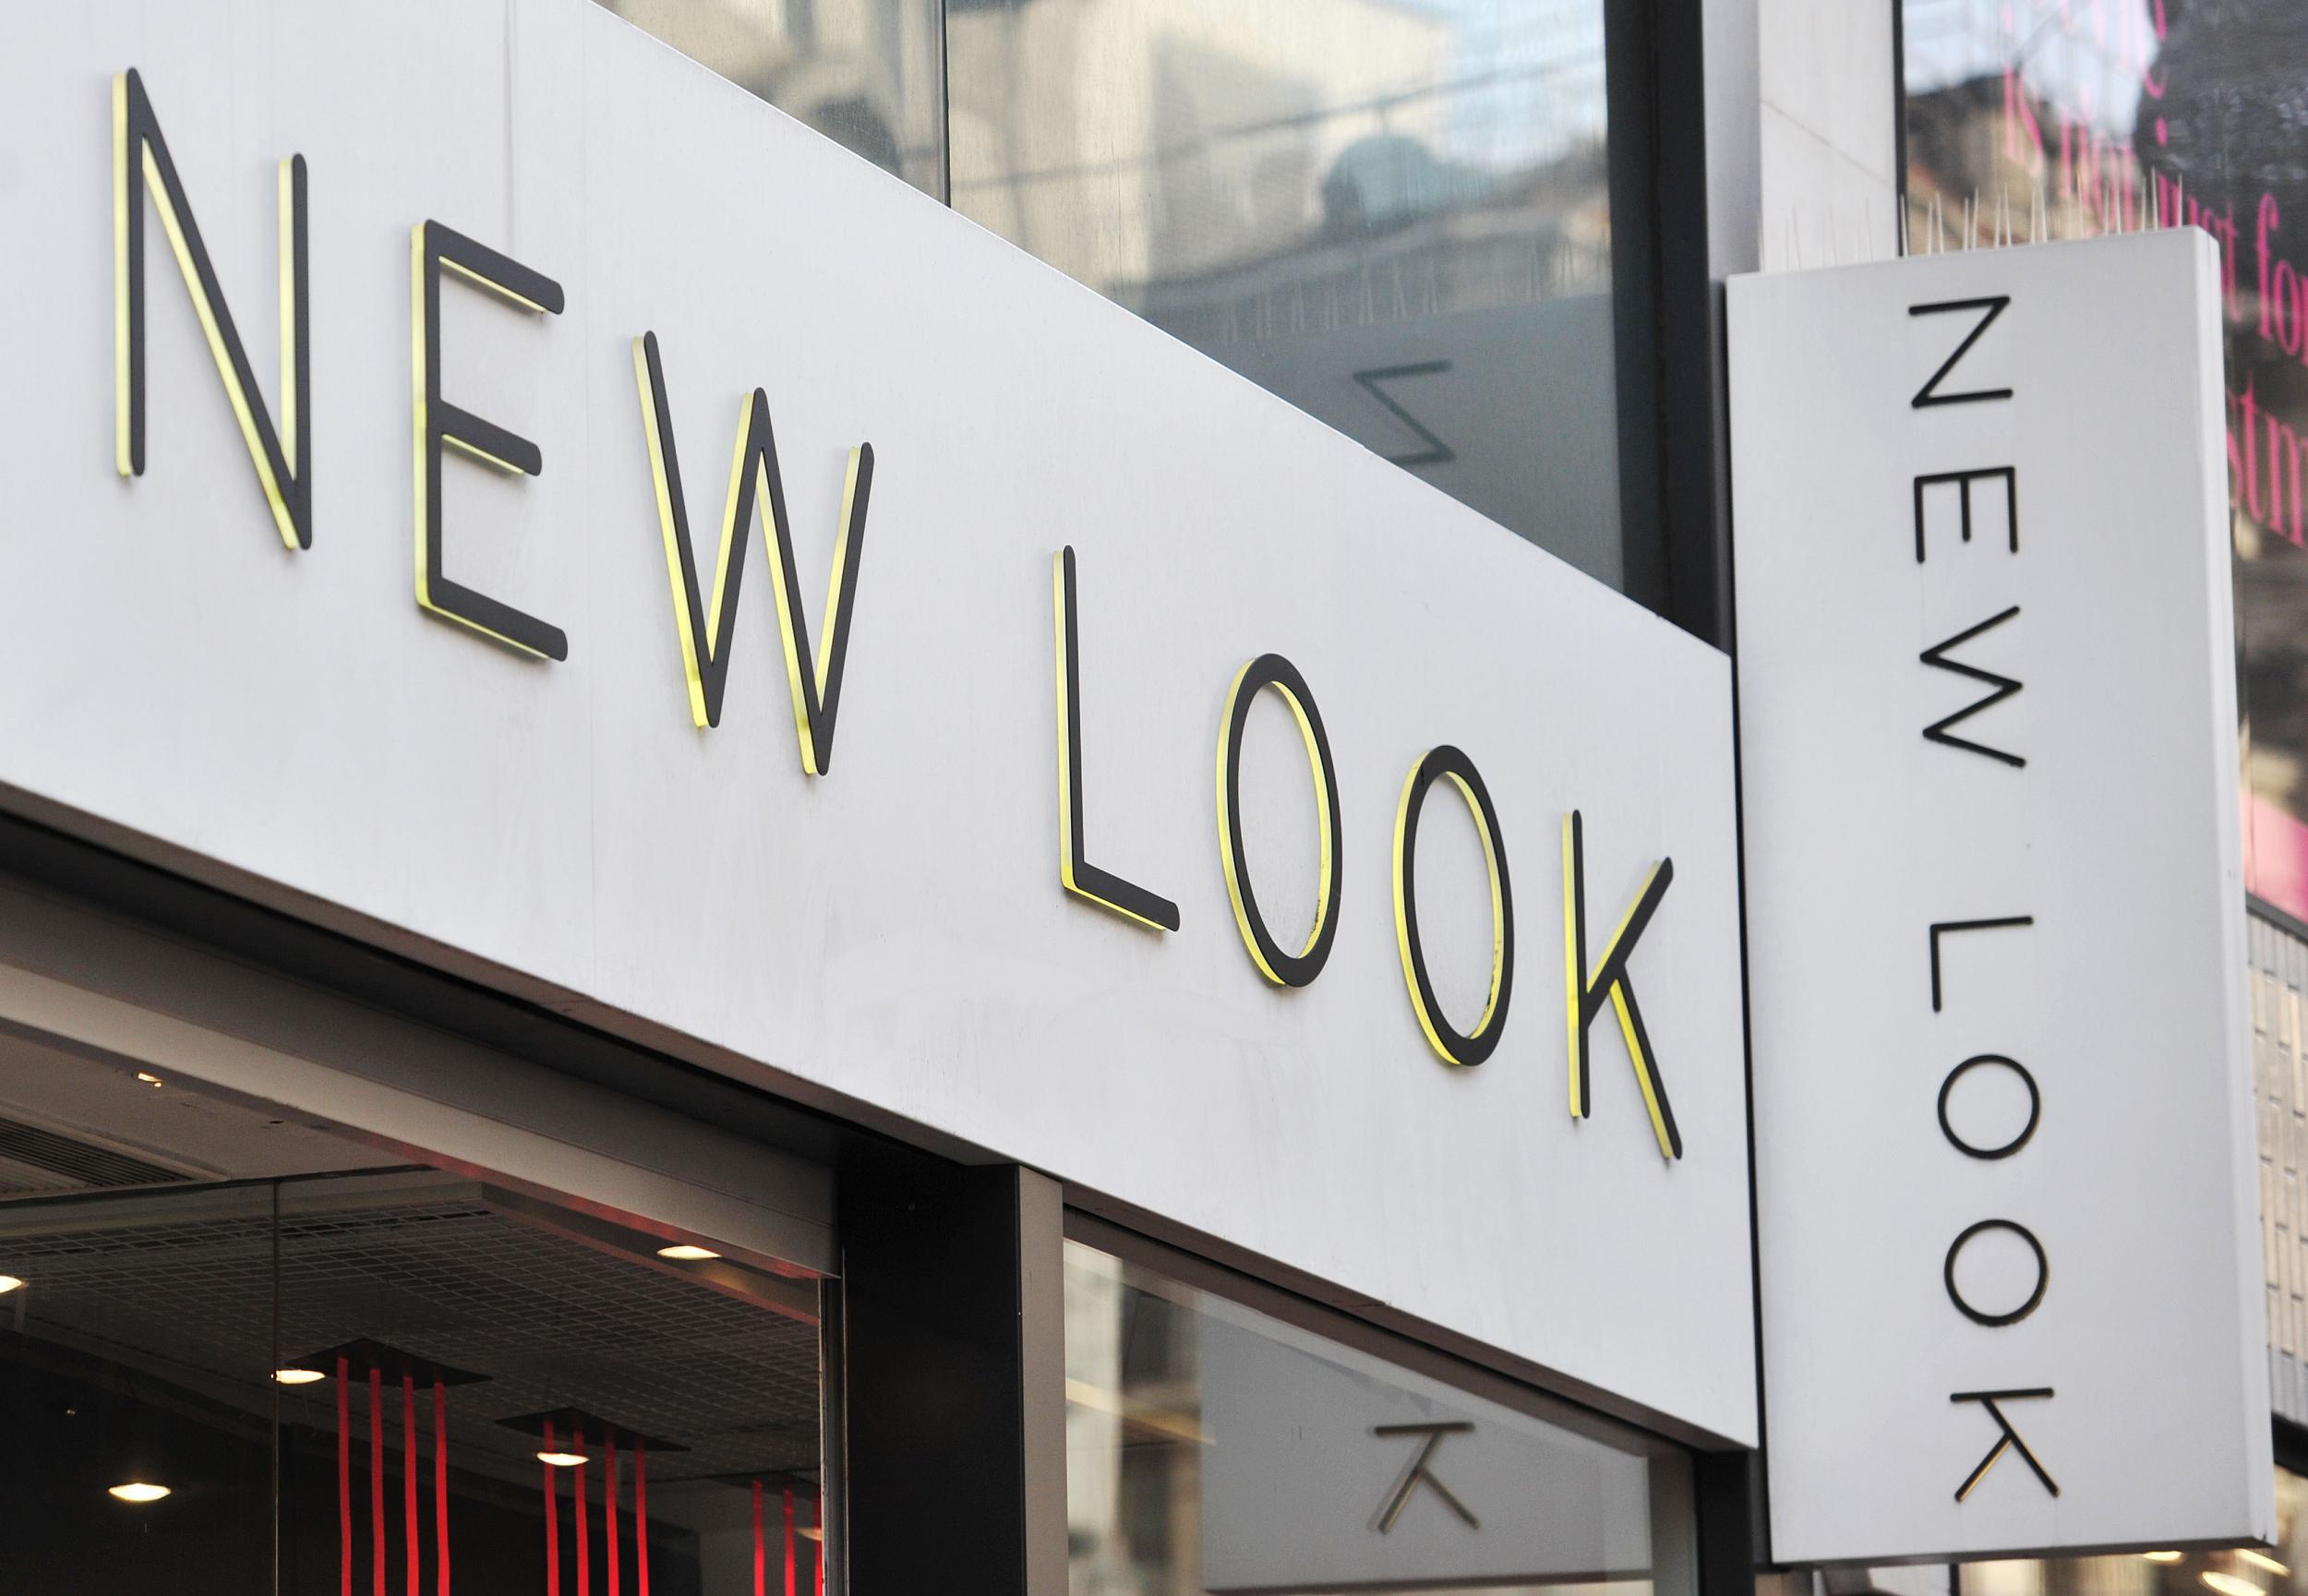 New Look opened its first store in 1969